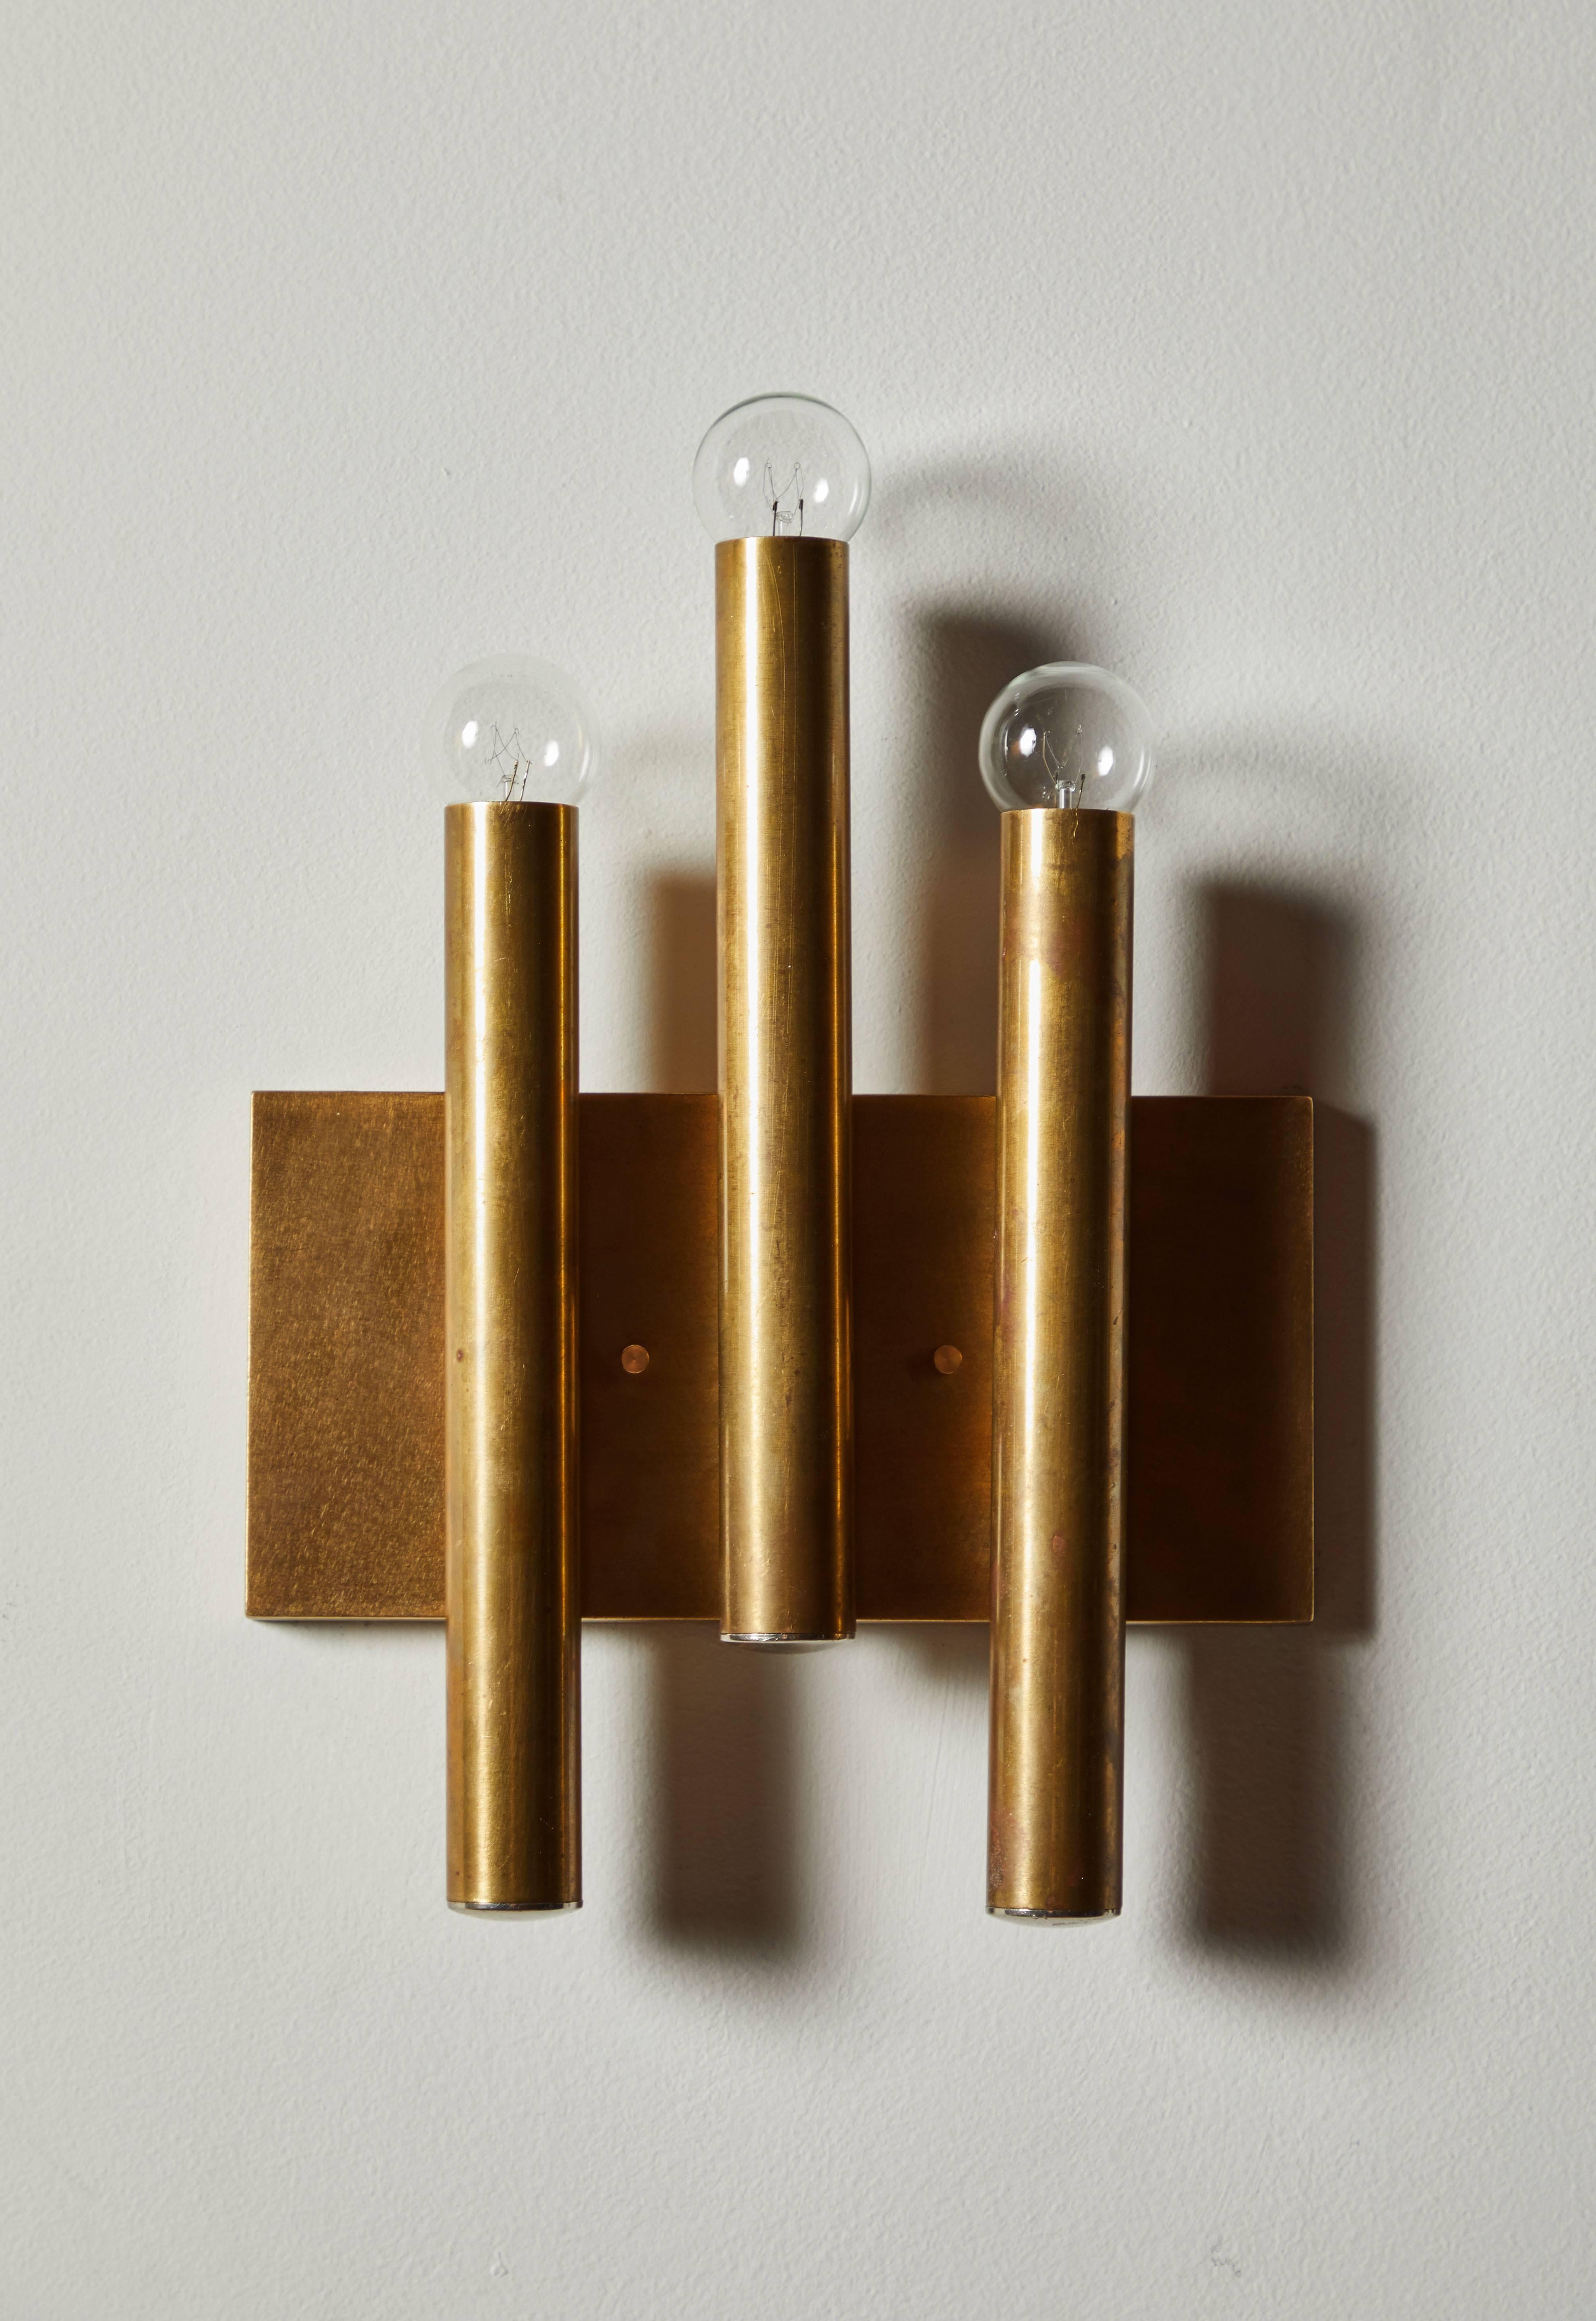 Single Italian Sconce in the Style of Gio Ponti for Candle 2